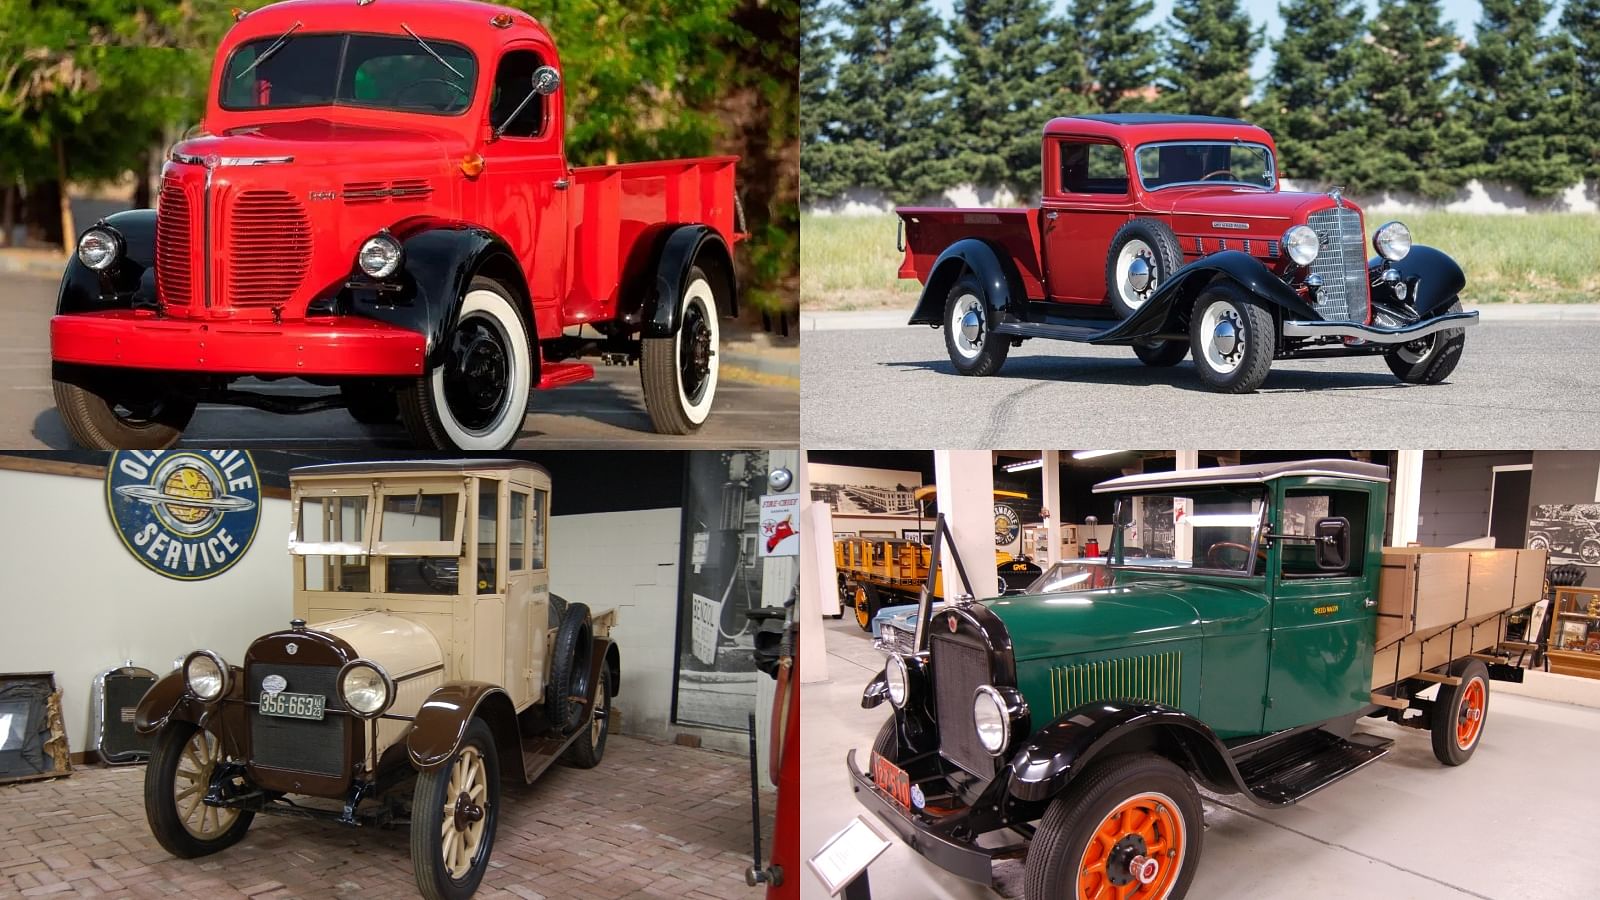 The REO Speed Wagon's Journey Through Time